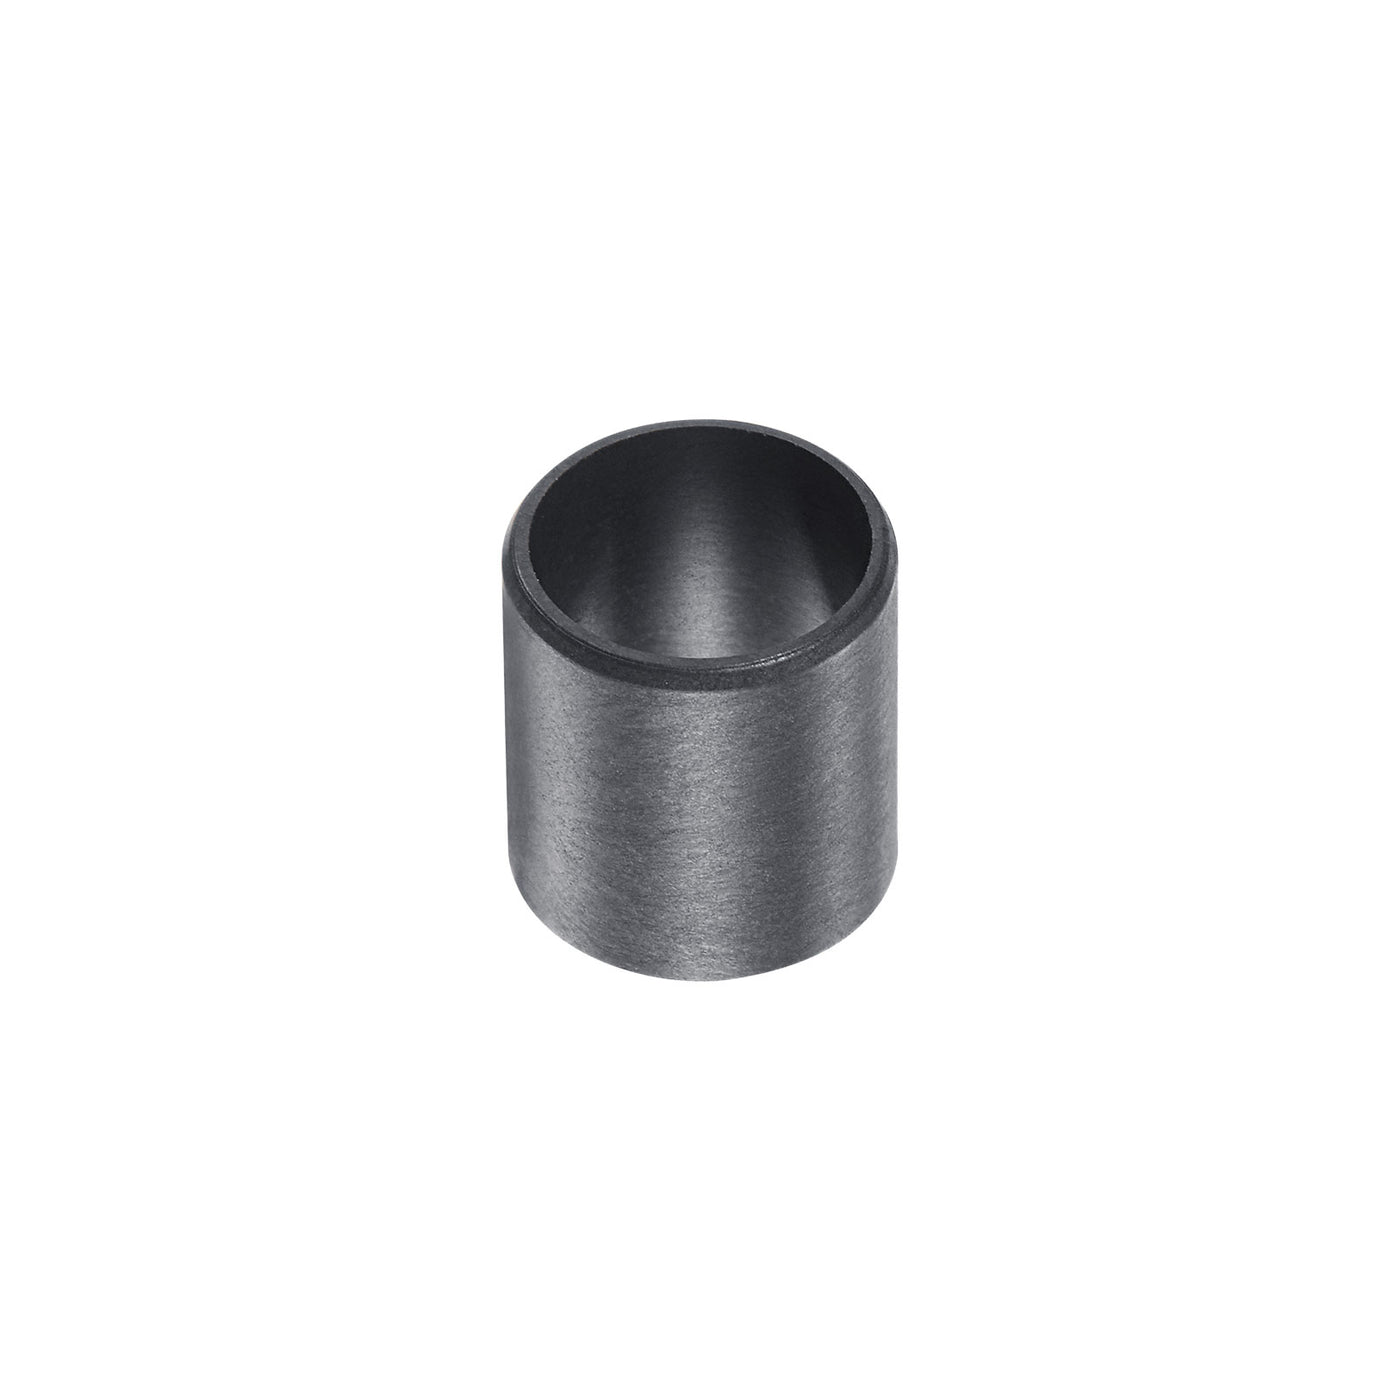 uxcell Uxcell Sleeve Bearings 12mmx14mmx15mm POM Wrapped Oilless Bushings Black